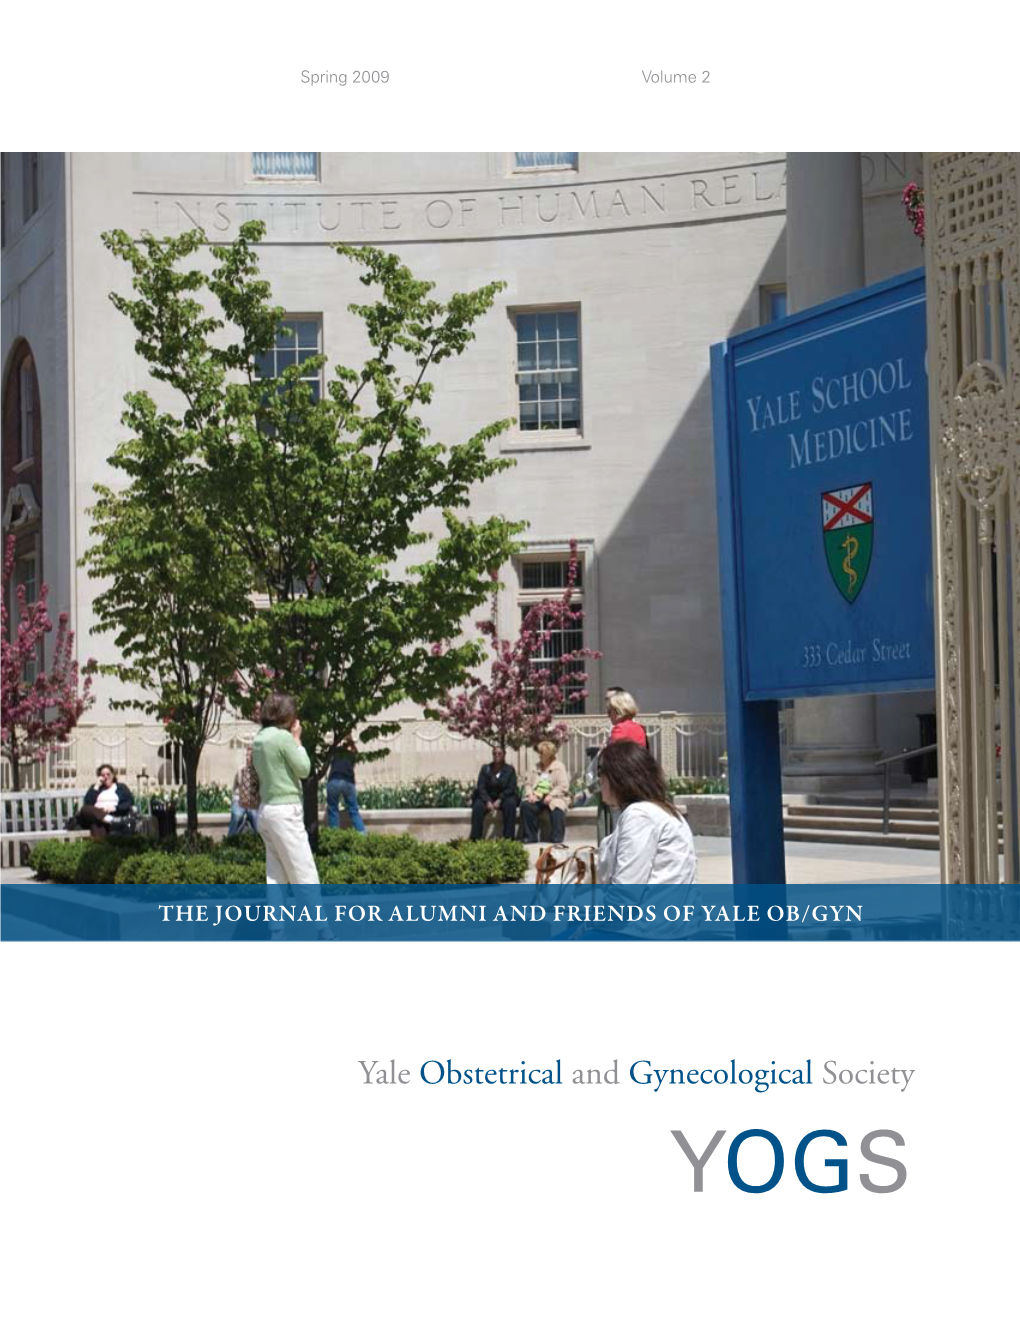 The Journal for Alumni and Friends of Yale OB/GYN